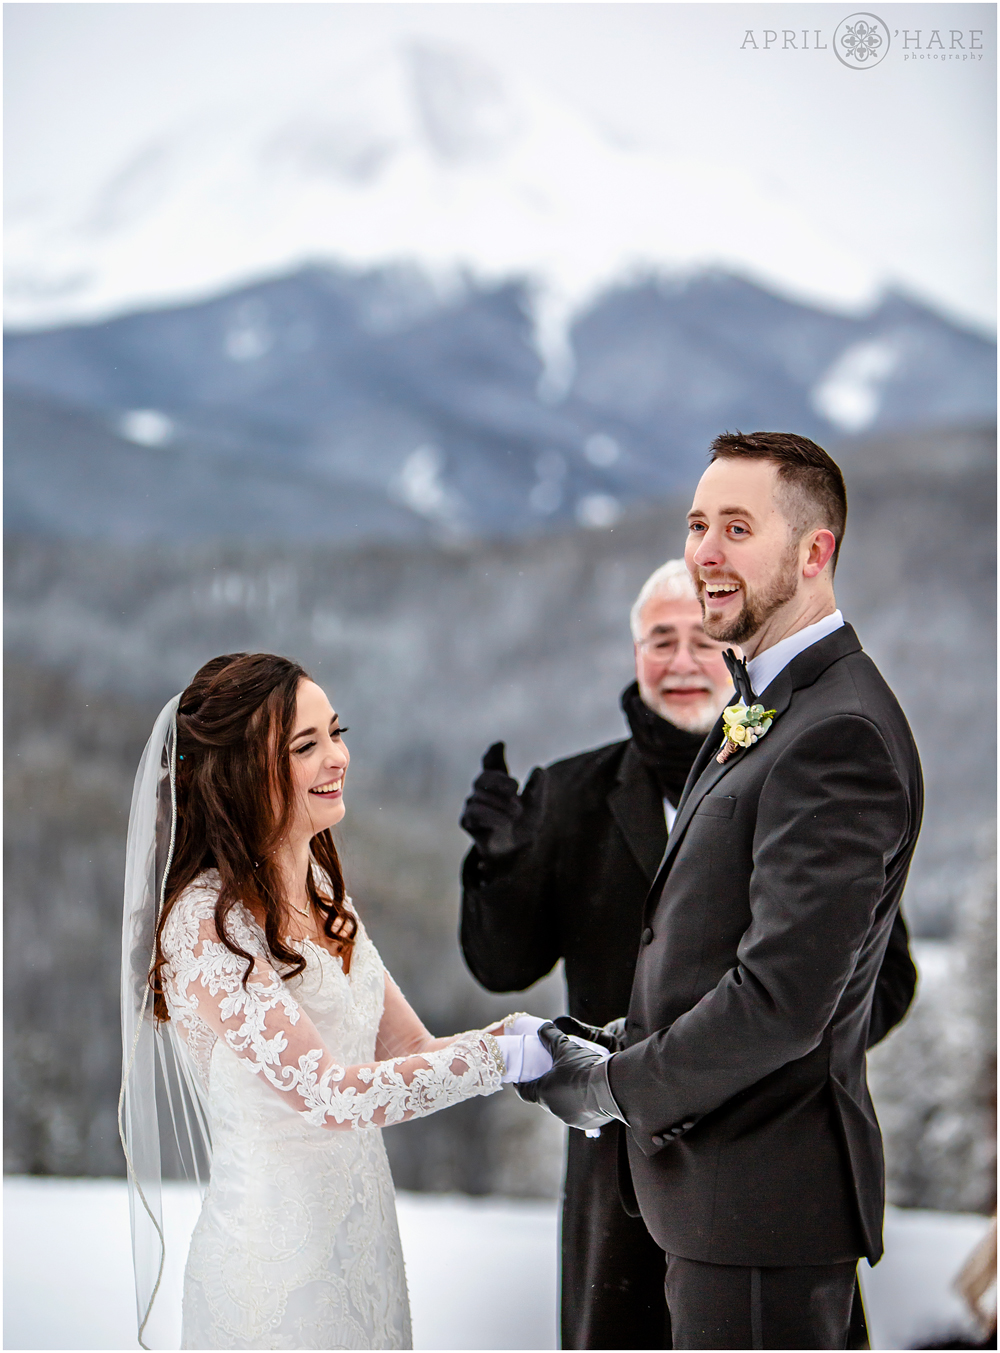 Bride in long sleeved lace dress and her groom at their outdoor winter wedding in Keystone